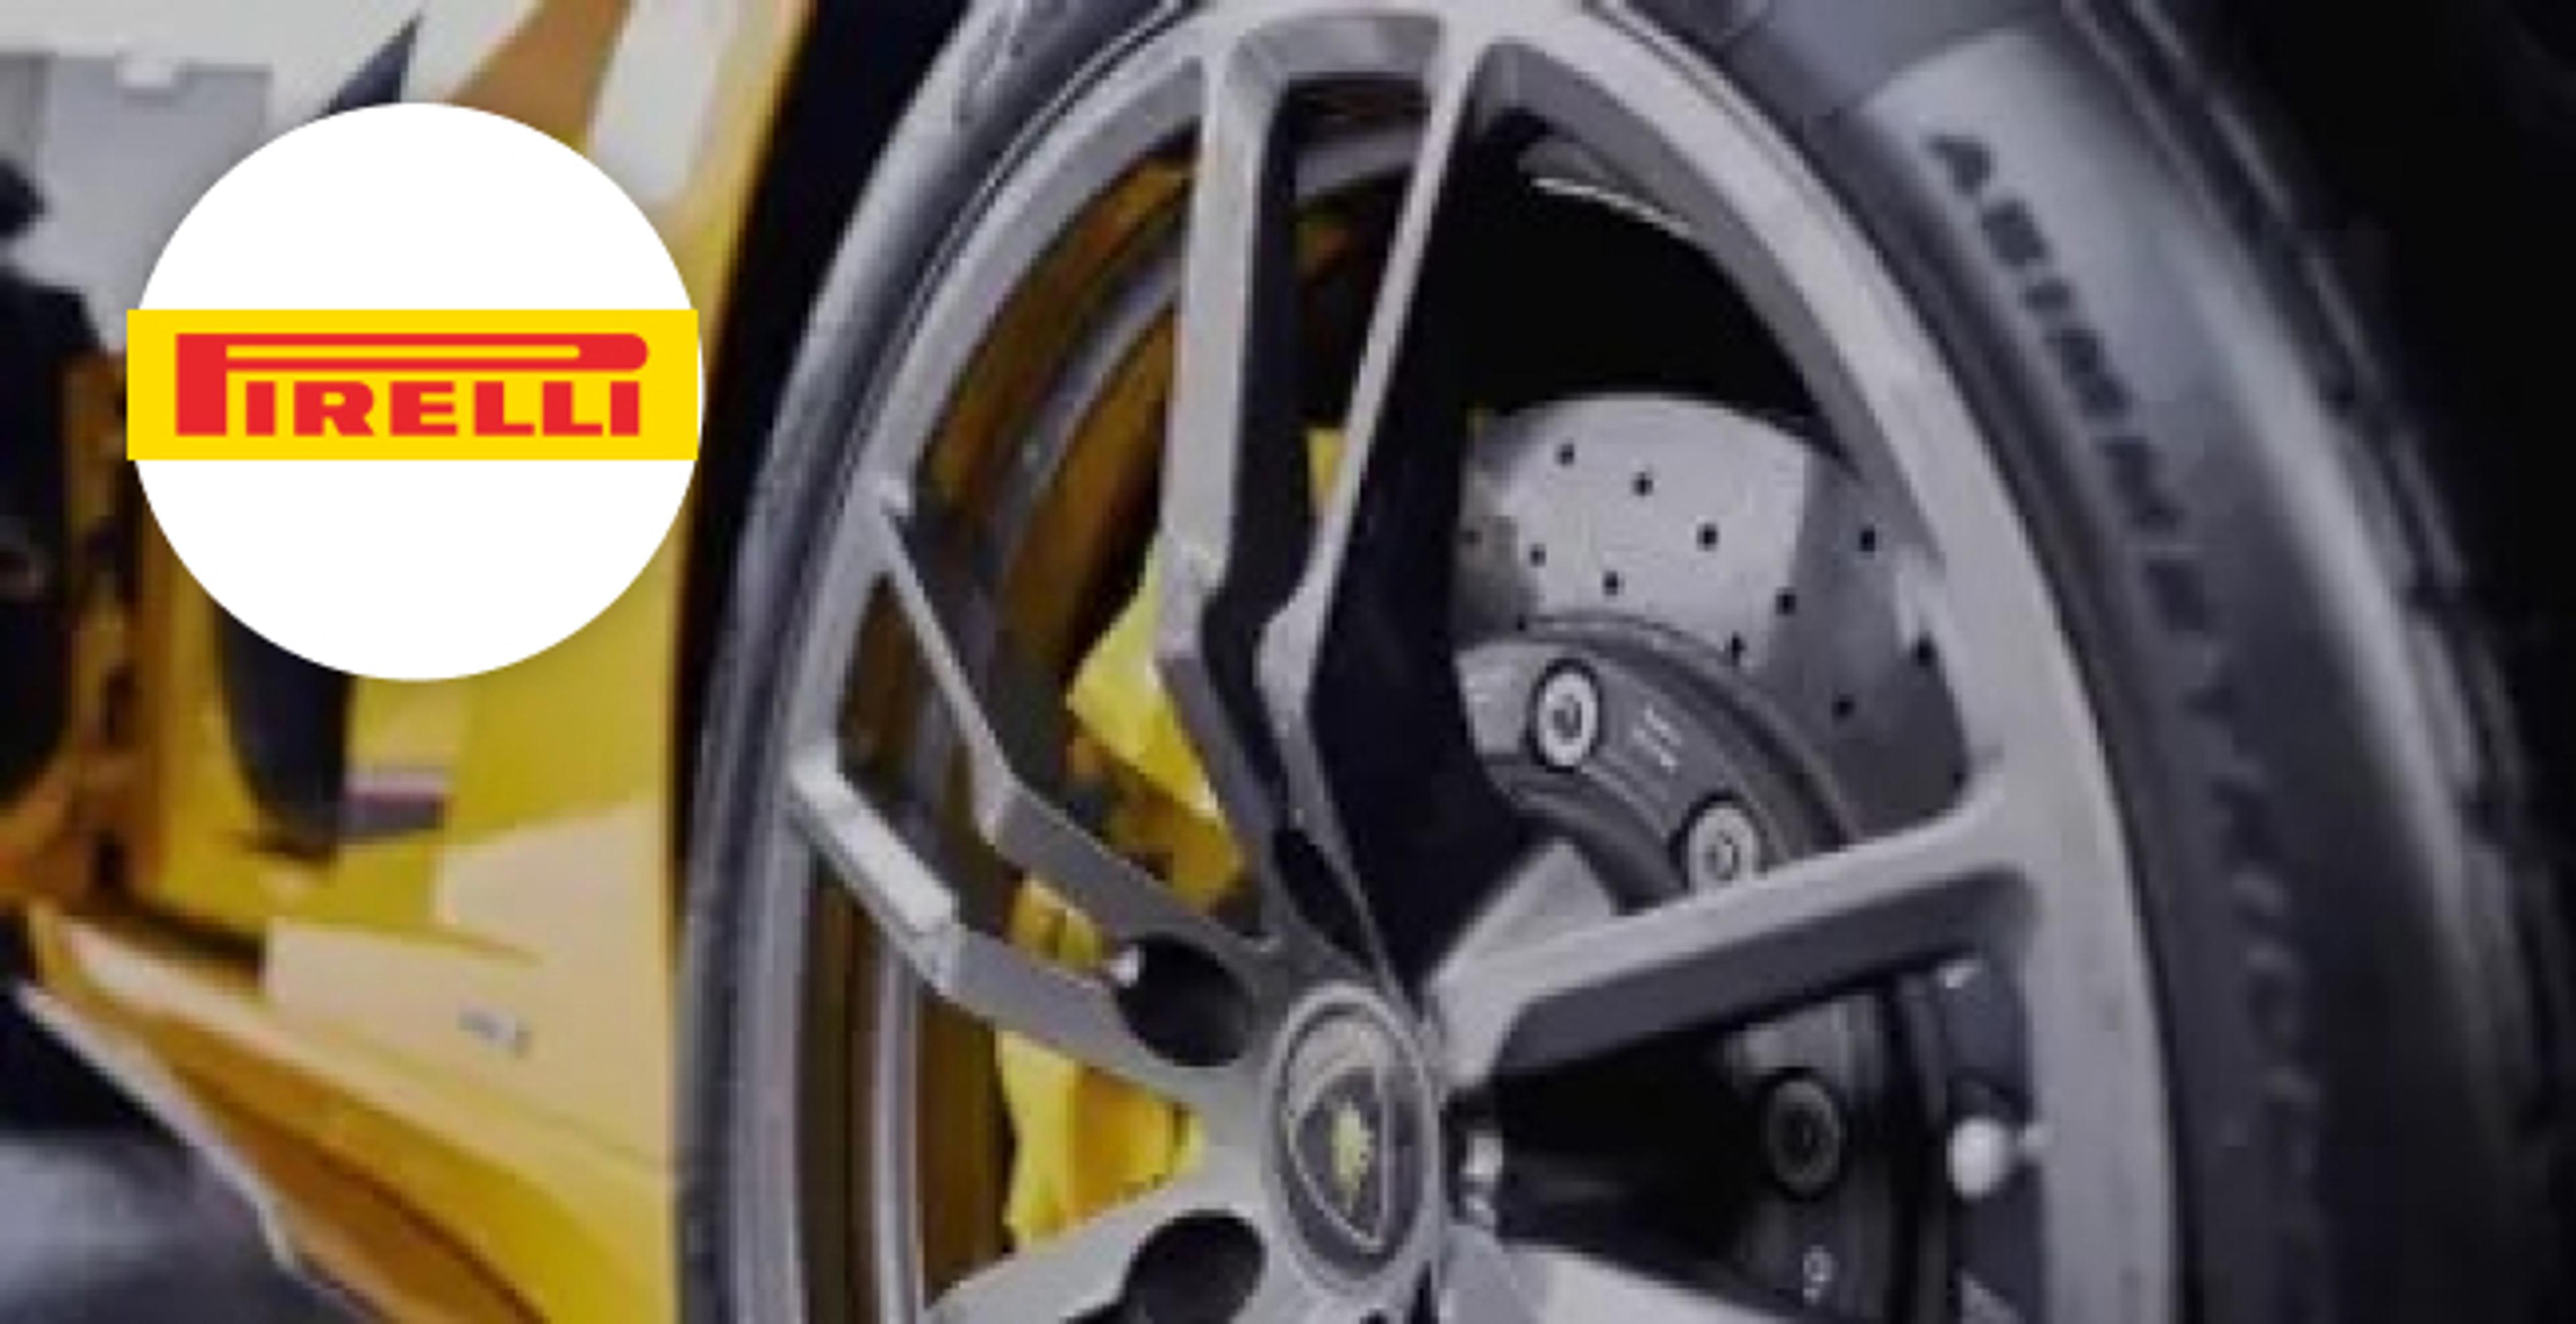 Save $80 instantly in-cart when you purchase 4 eligible Pirelli tires!